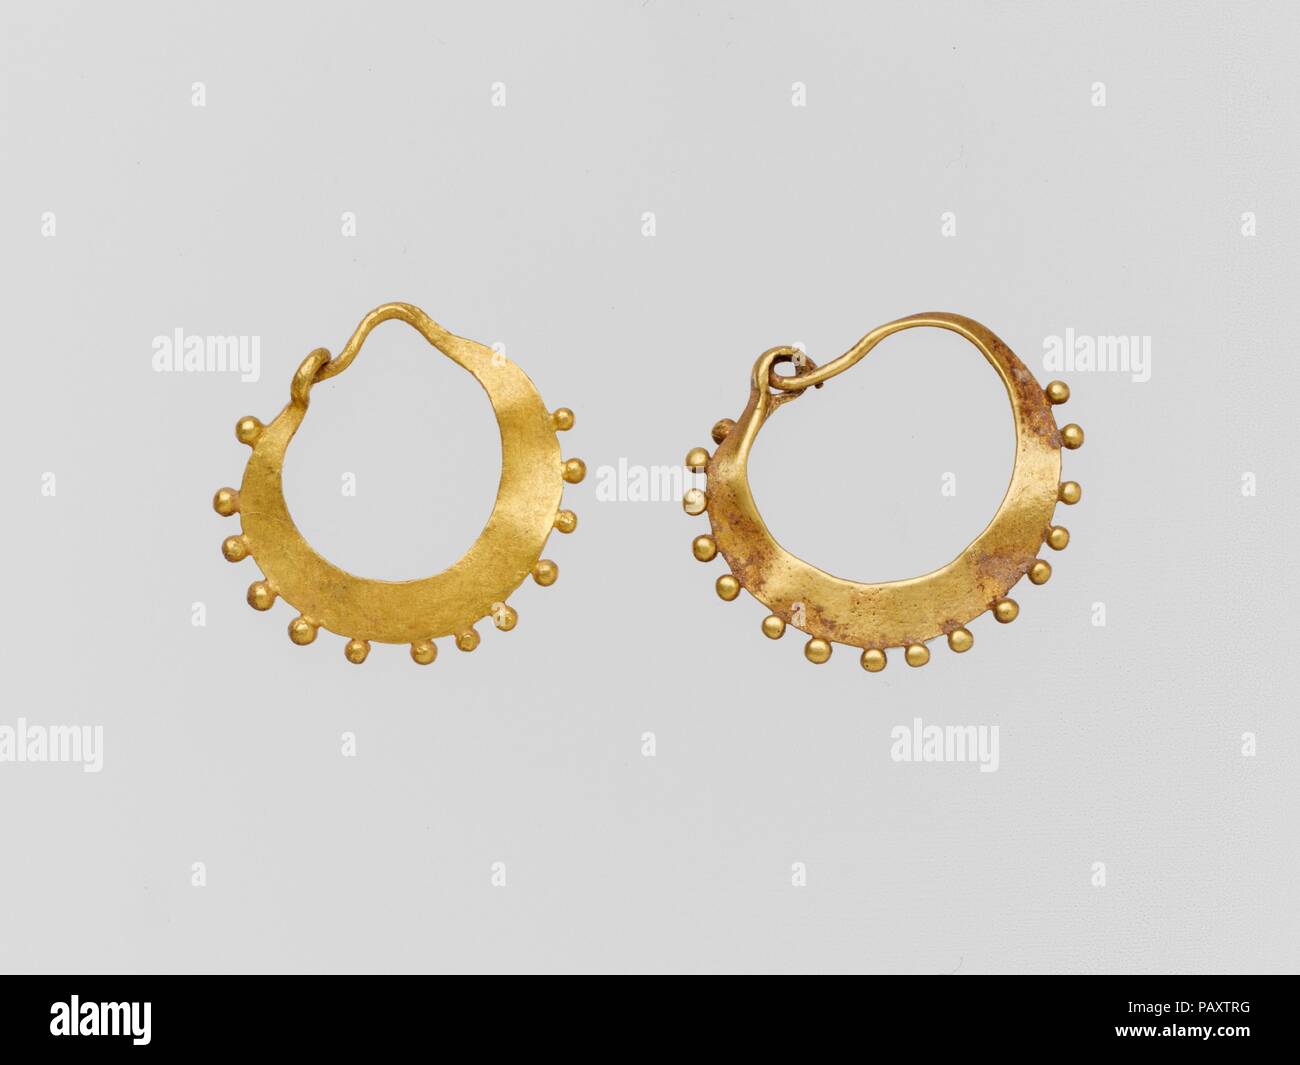 Earring, crescent-shaped, decorated. Culture: Roman. Dimensions: Diam.: 13/16 in. (2.1 cm). Date: 1st century A.D..  With minute balls on the edges. Museum: Metropolitan Museum of Art, New York, USA. Stock Photo